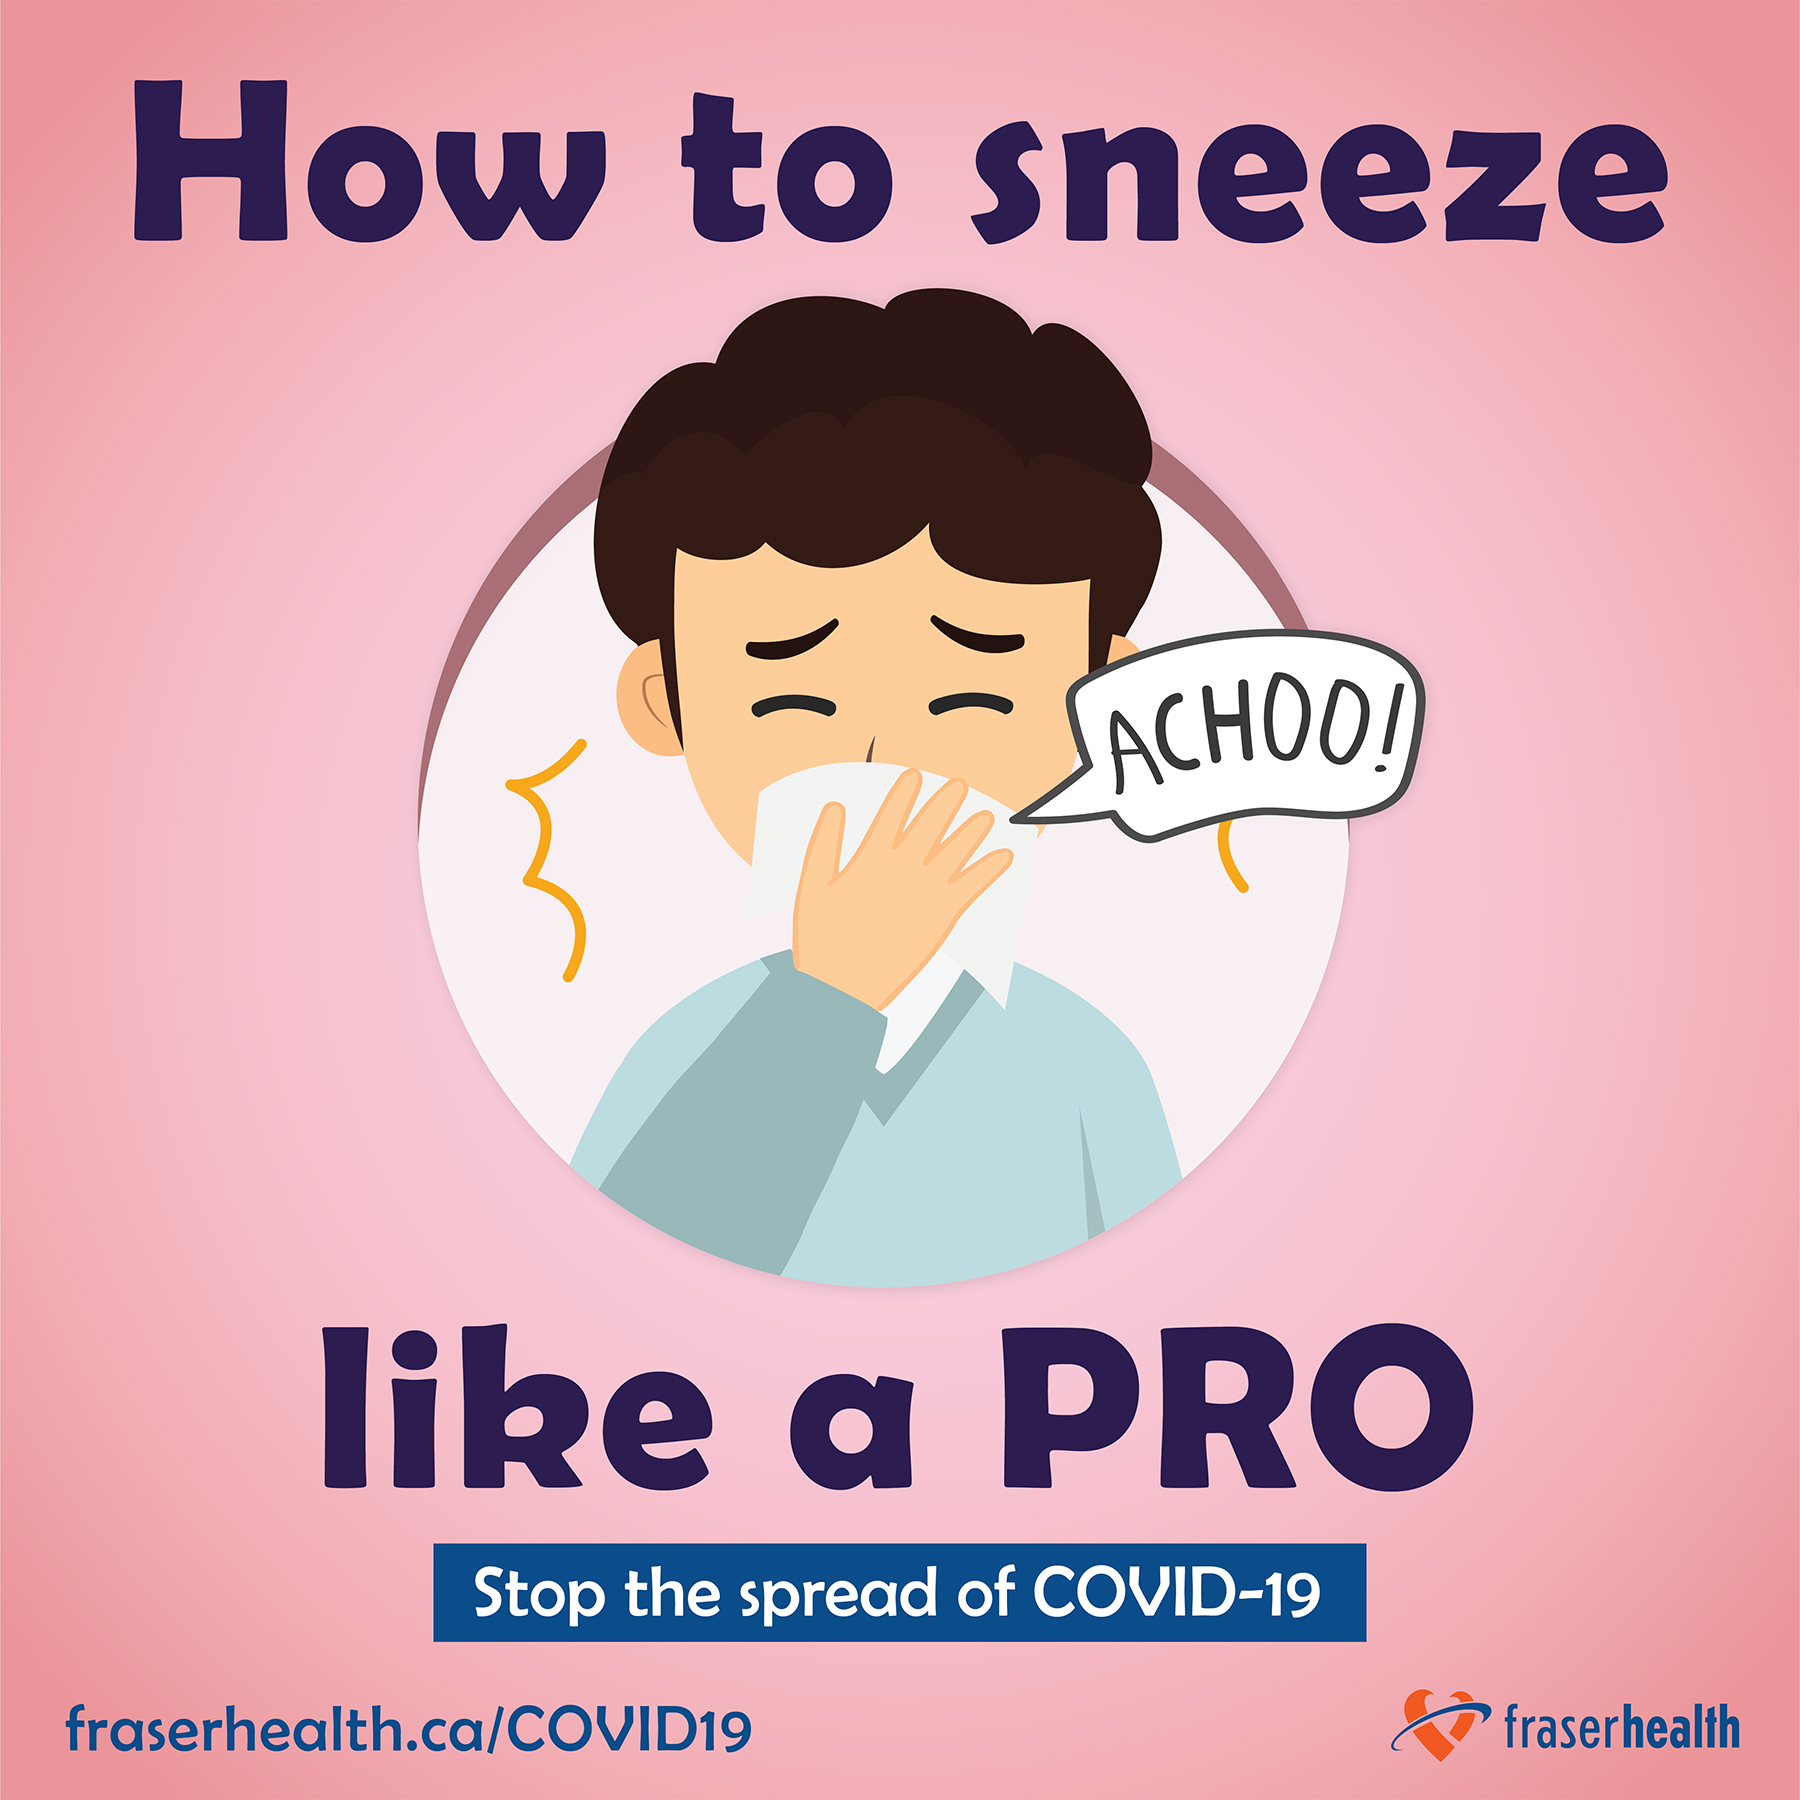 How to sneeze like a pro graphic with male character for COVID-19